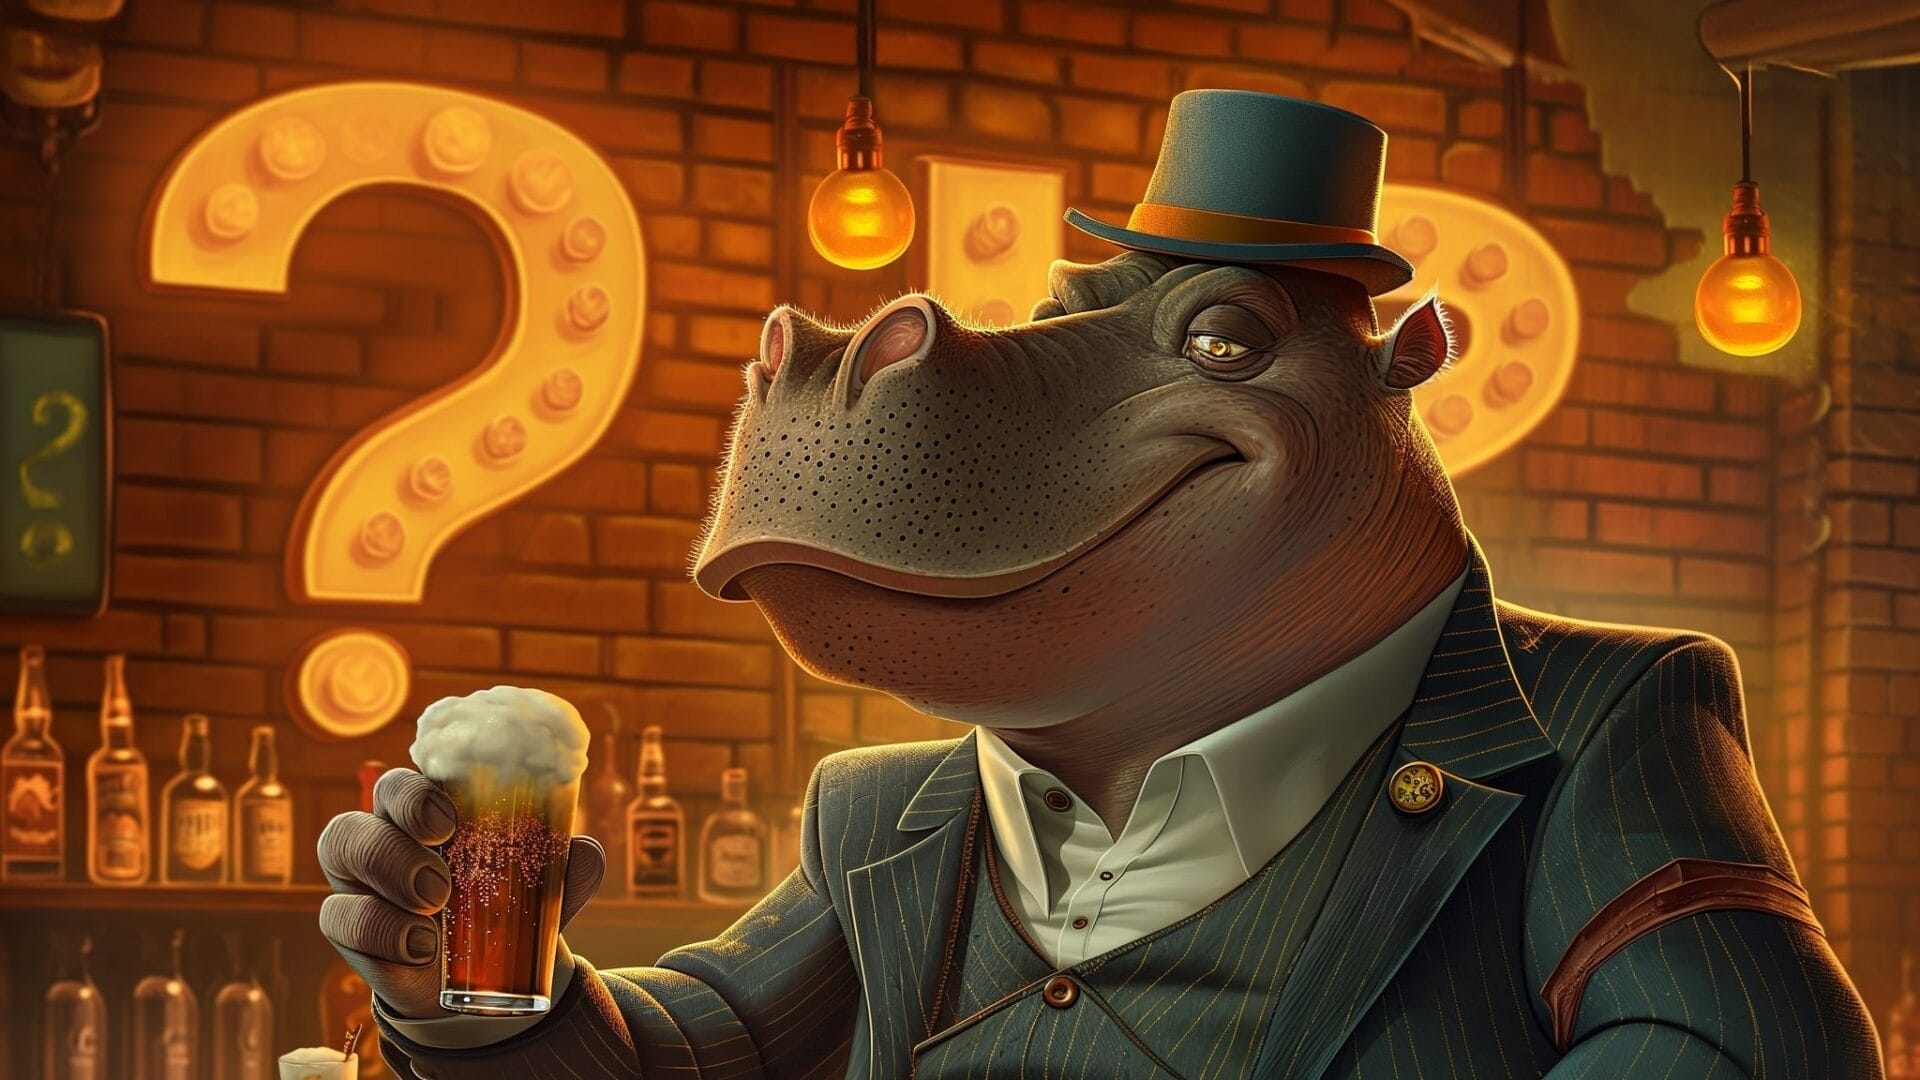 A hippo in a top hat holding a beer raises questions about artificial intelligence.